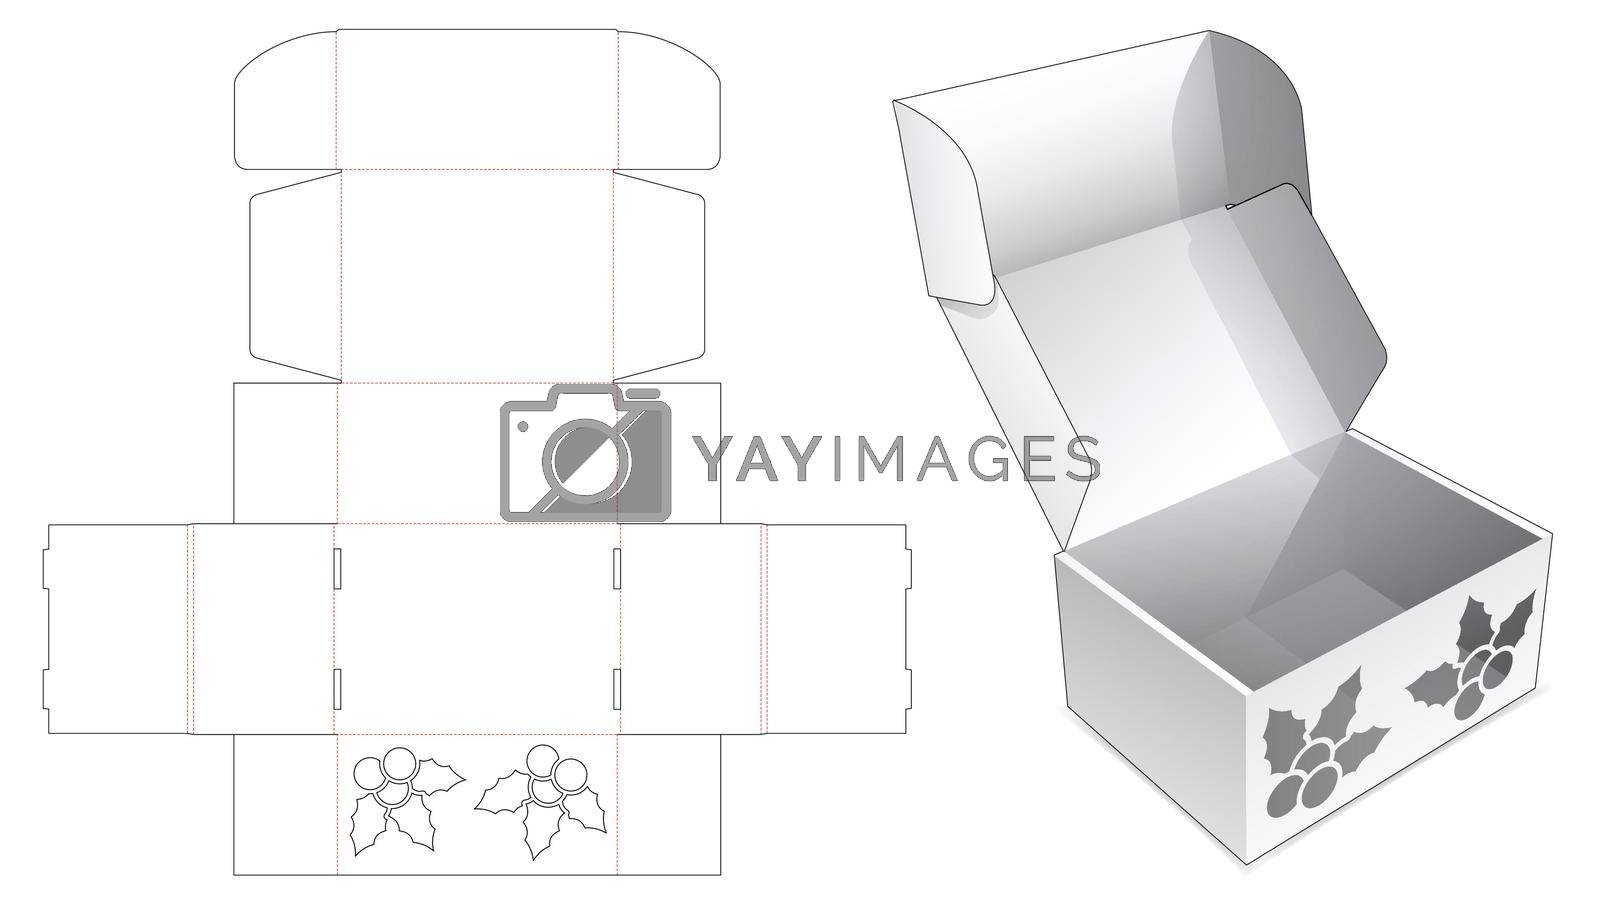 Royalty free image of Cardboard flip box with hidden holly window die cut template by valueinvestor